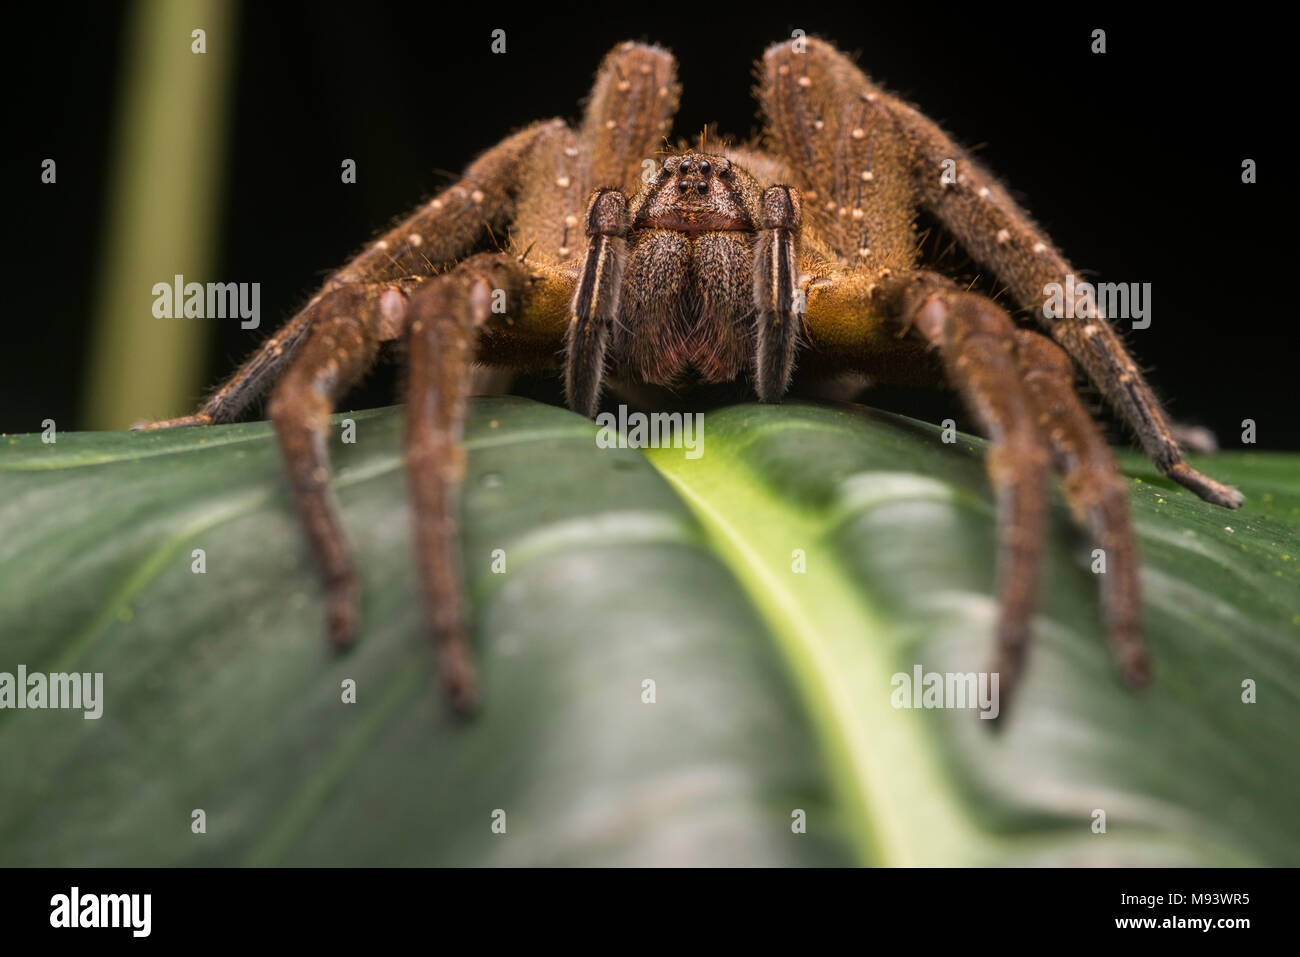 A wandering spider (Phoneutria species) from the Peruvian jungle. These spiders are thought to have one of the most potent of venoms among spiders. Stock Photo